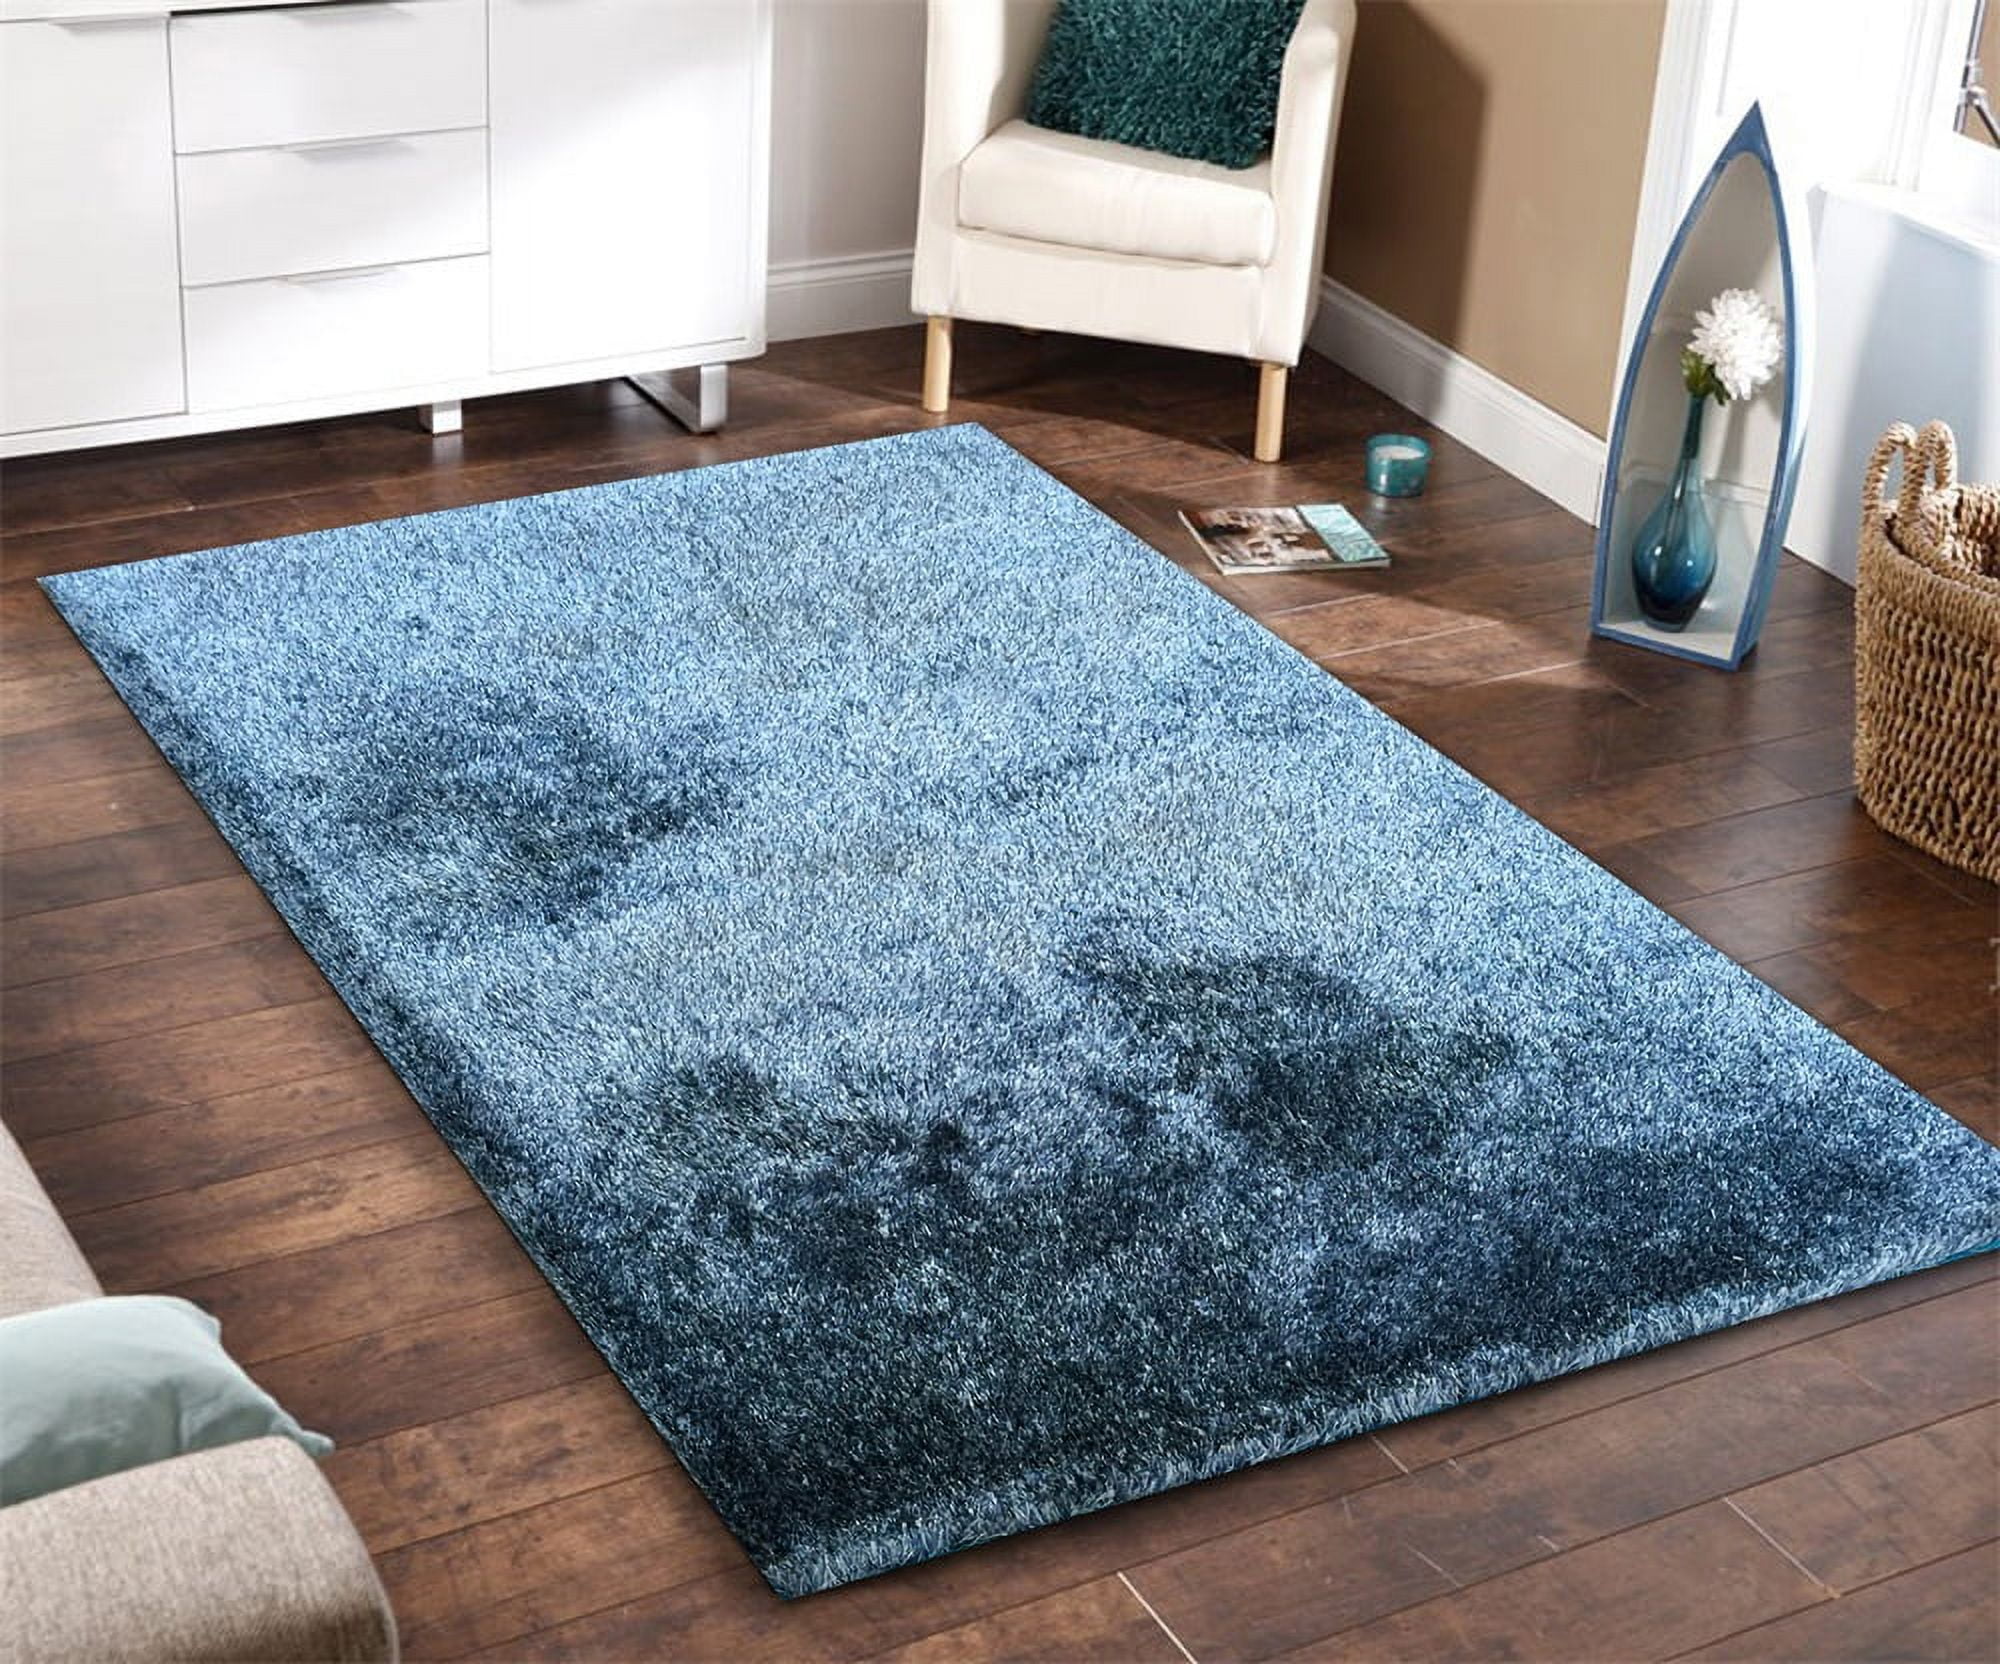 Modern Soft Area Rug Level maps for Game Traditional Asian Houses on  Islands Fantasy Land 3D Home Plush Rugs Non Slip Shaggy Carpets for Living  Room